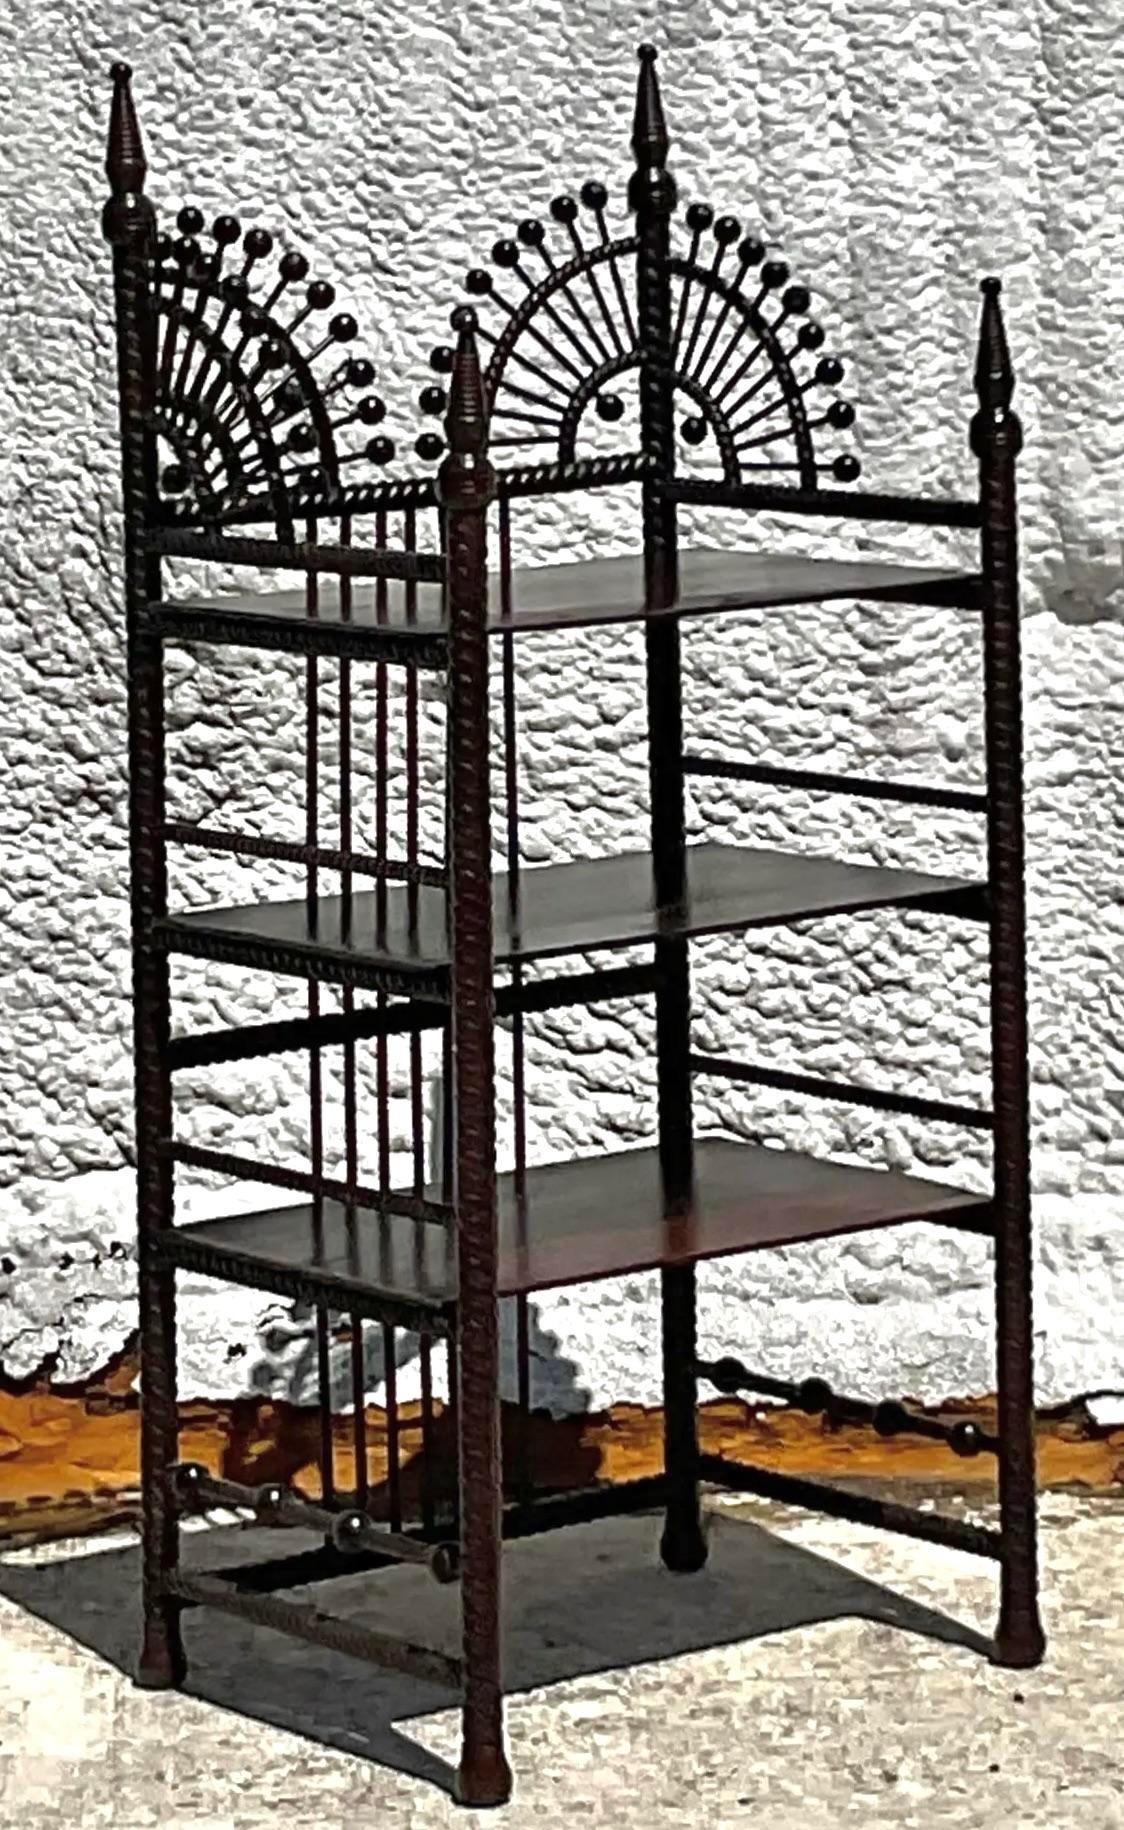 Embrace Bohemian elegance with a touch of Americana using this Vintage Boho Stick and Ball Petite Etagere. Crafted with intricate stick and ball detailing, it exudes a whimsical charm reminiscent of 19th-century American craftsmanship. Perfect for